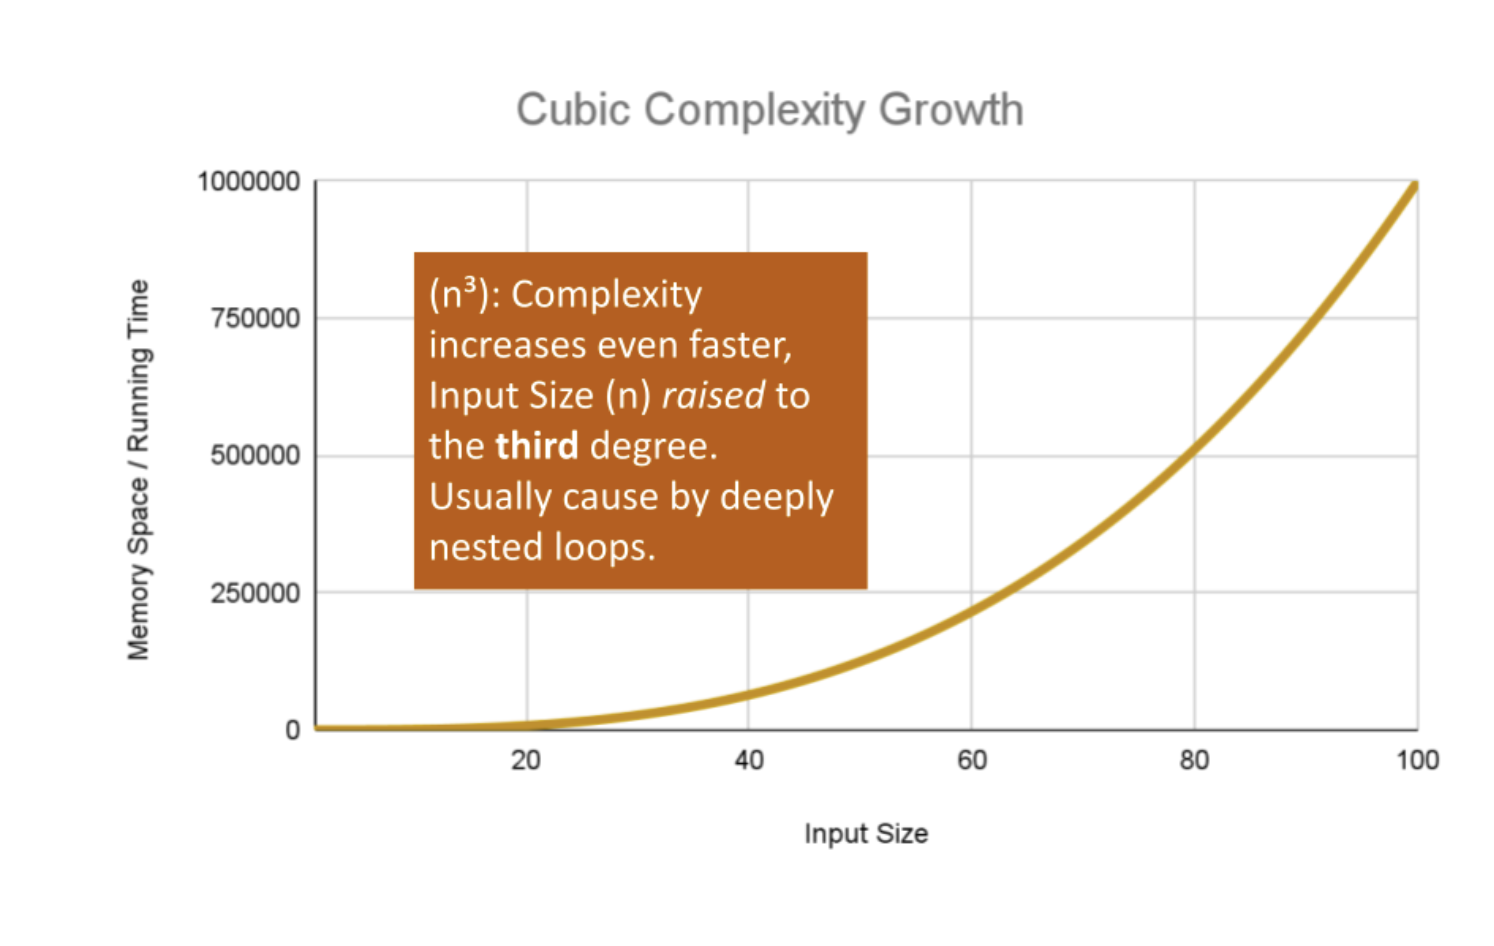 Cubic complexity